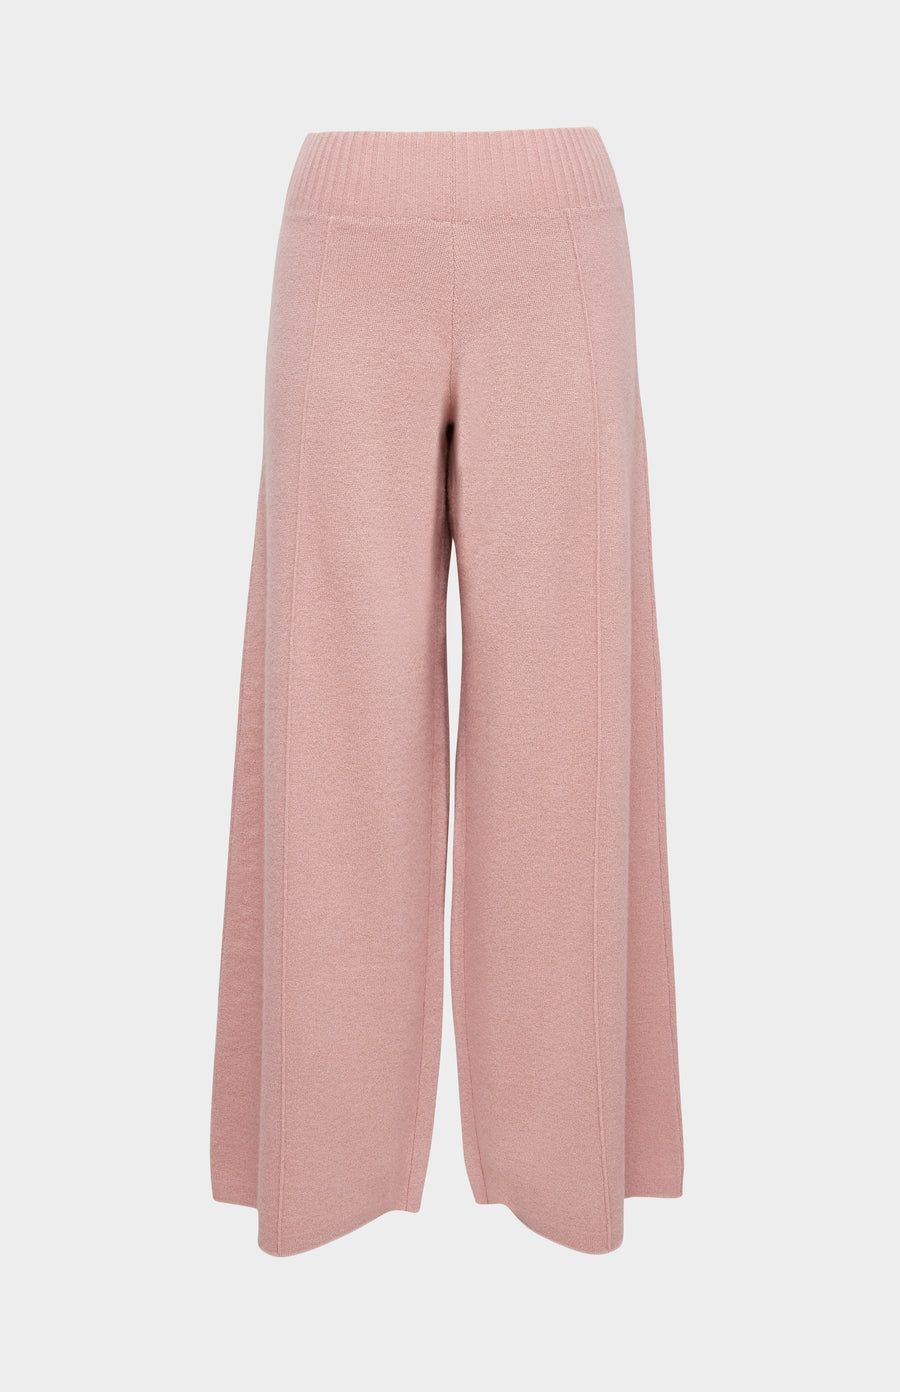 Pringle of Scotland Women's Cashmere Blend Trousers In Dusty Pink